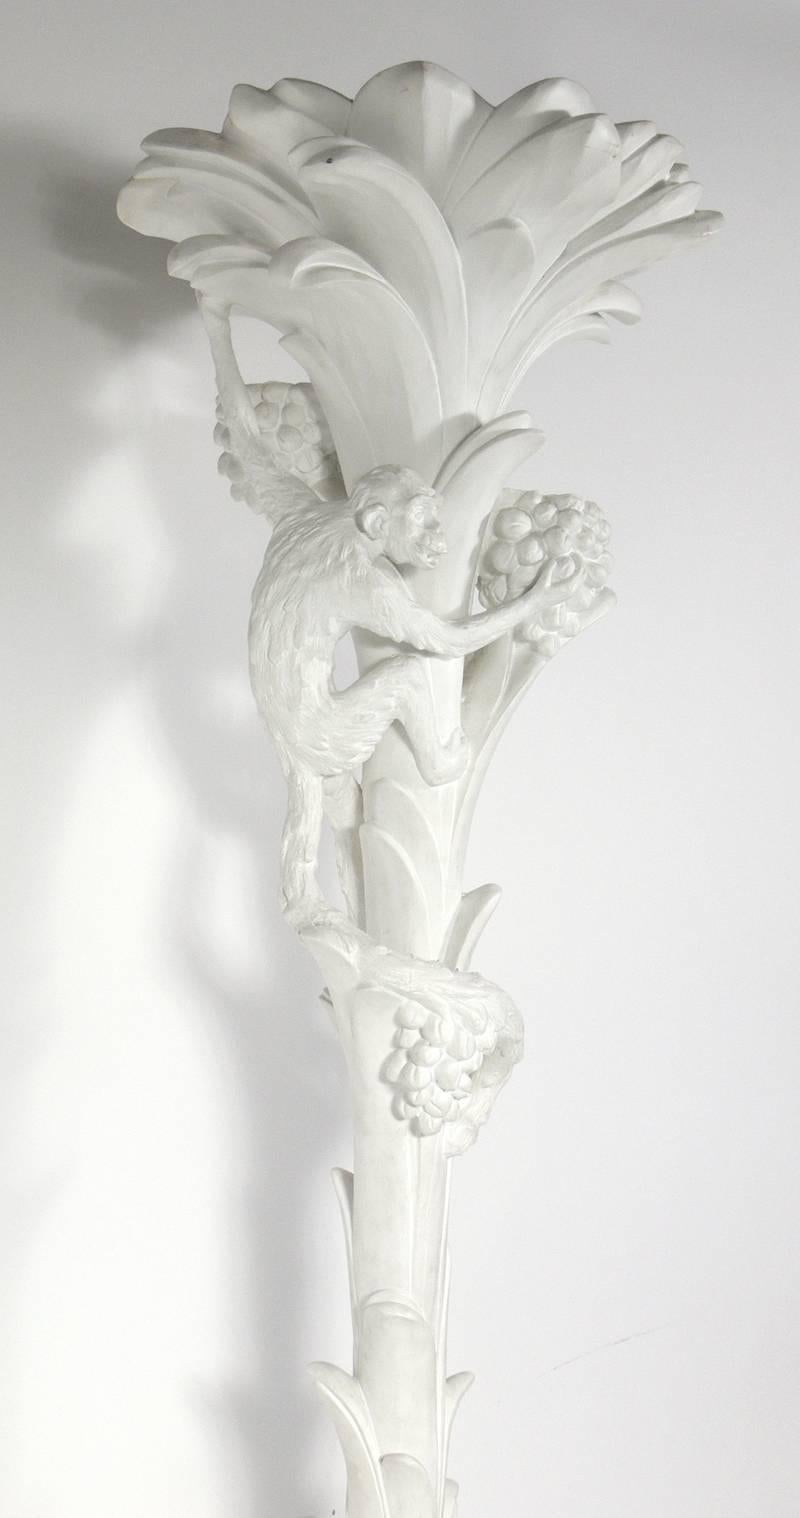 Original plaster torchiere designed by Serge Roche, France, circa 1940s. Very hard to find example of Roche's oeuvre. At nearly 7.5' high, this piece has a wonderful scale and an elegant design with a dash of whimsy. It looks wonderful when lit, and